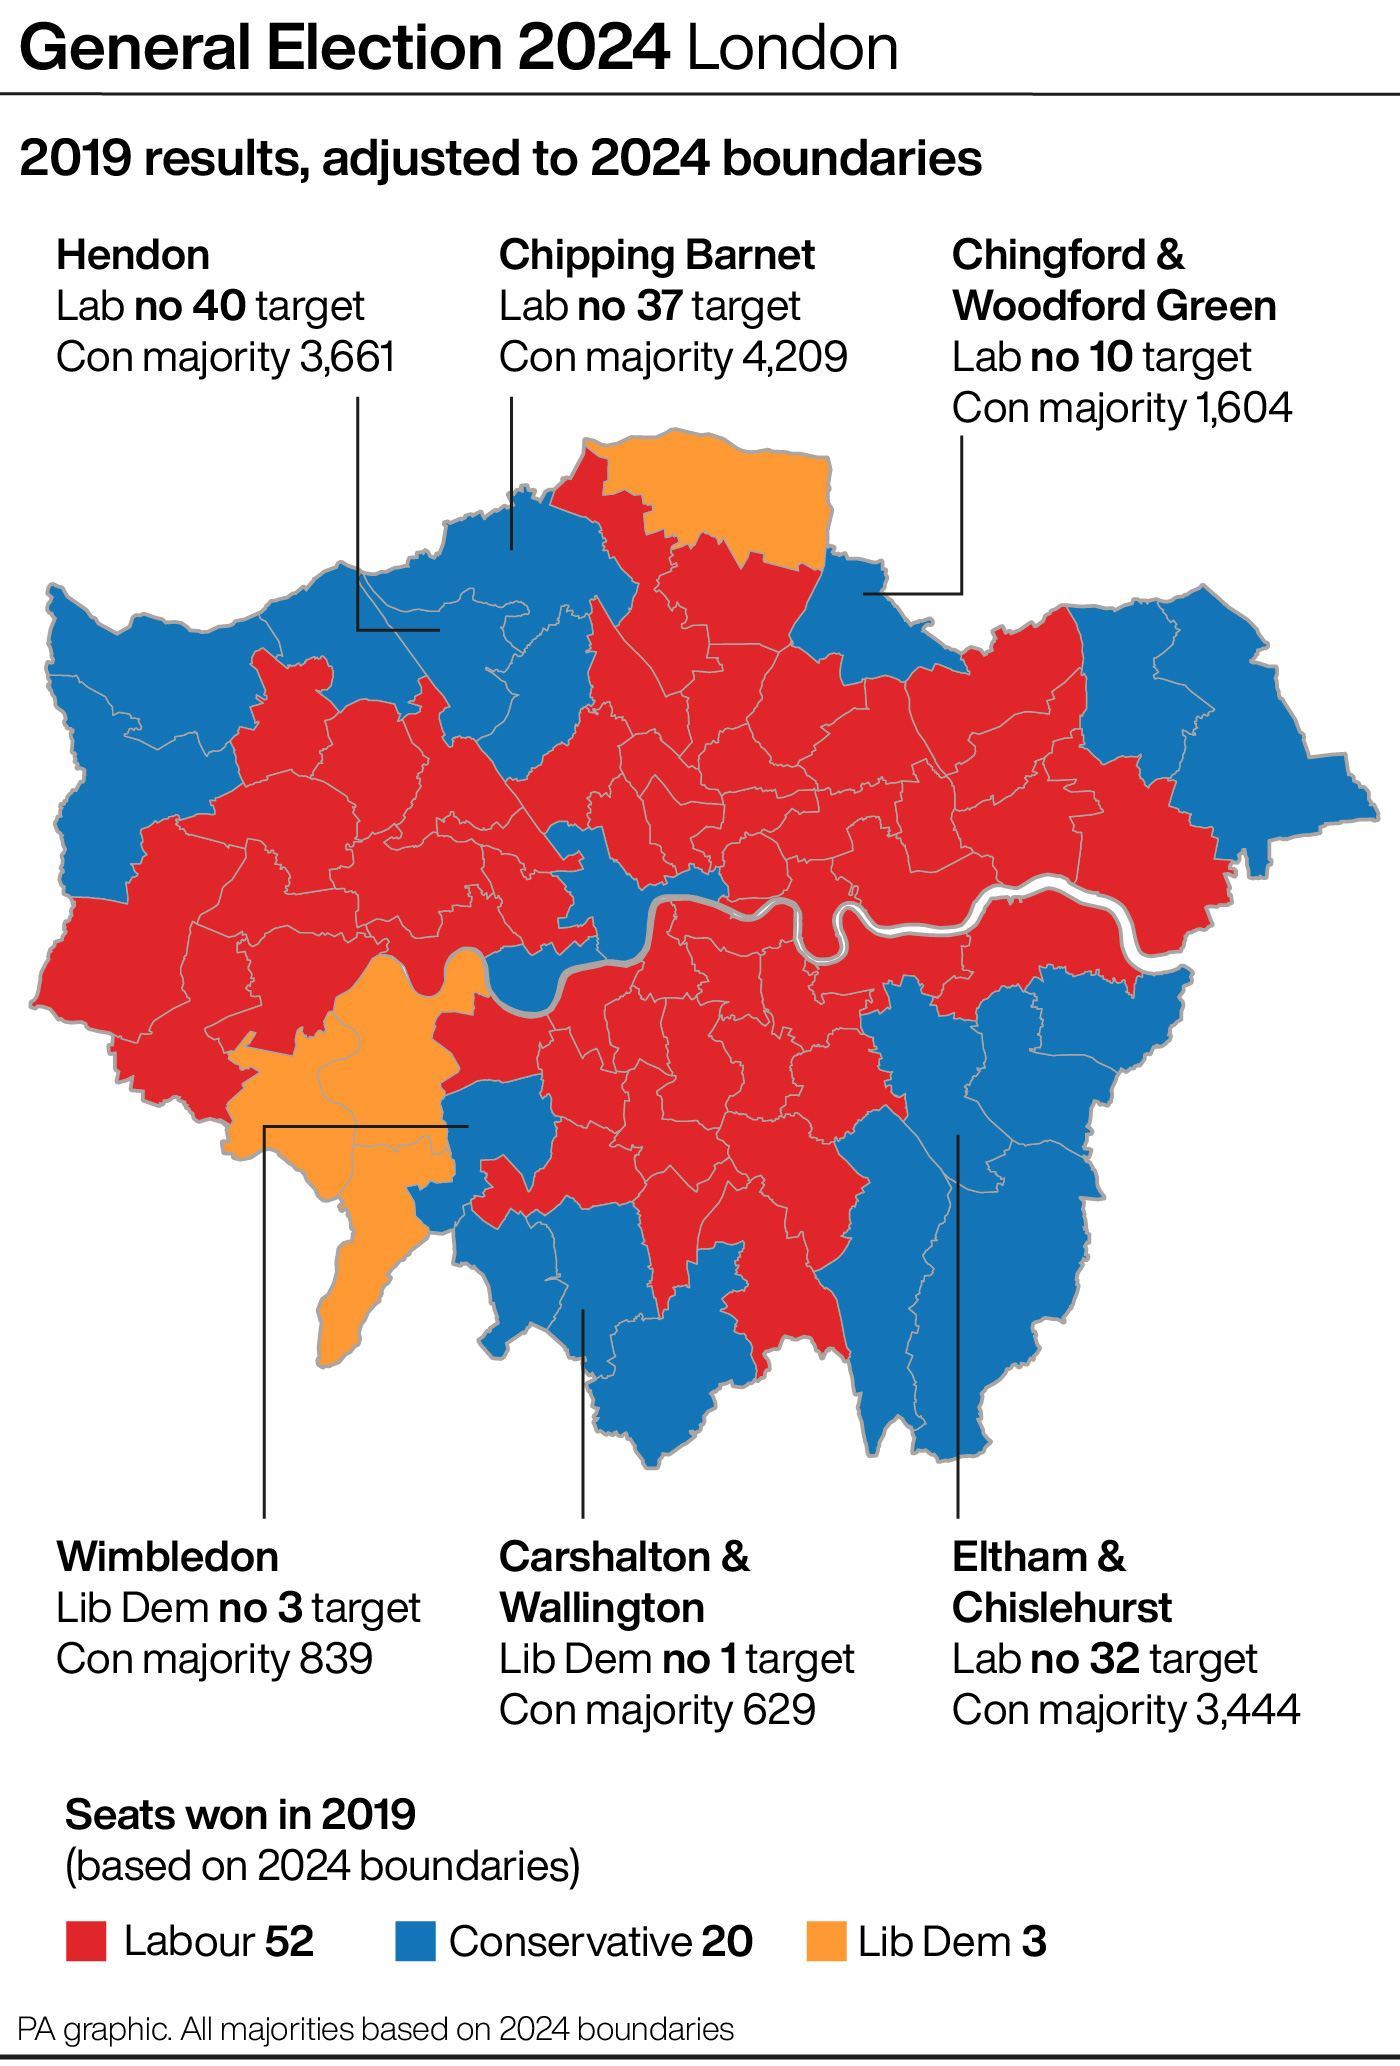 A map showing key battleground seats in London at the General Election